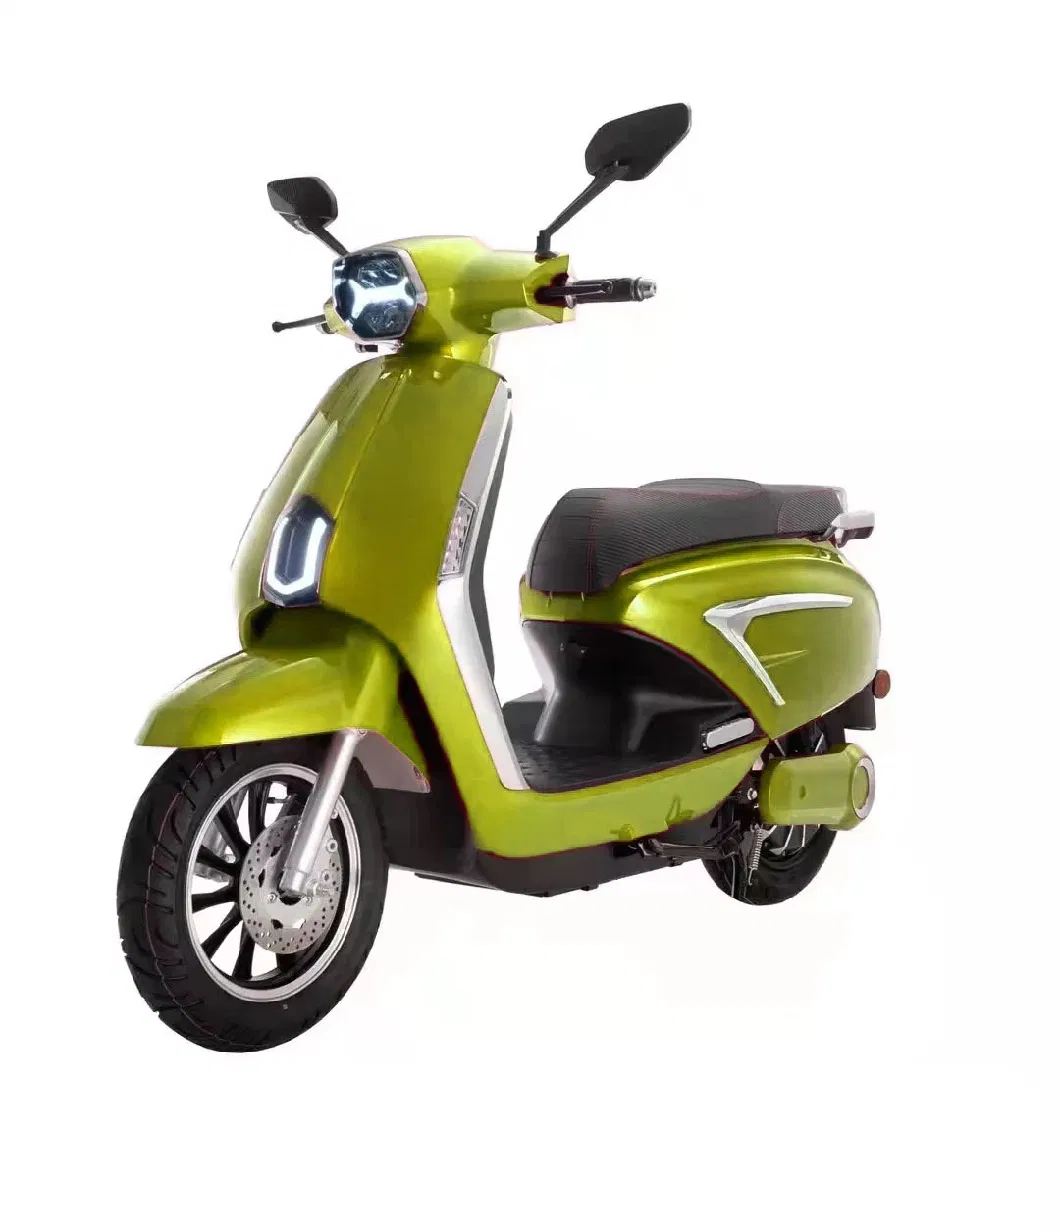 Wholesale Best Supplier Electric Motorcycle Scooter 60V 20ah Legal City Scooter Moped Cheap Electric E-Bike Motorcycle